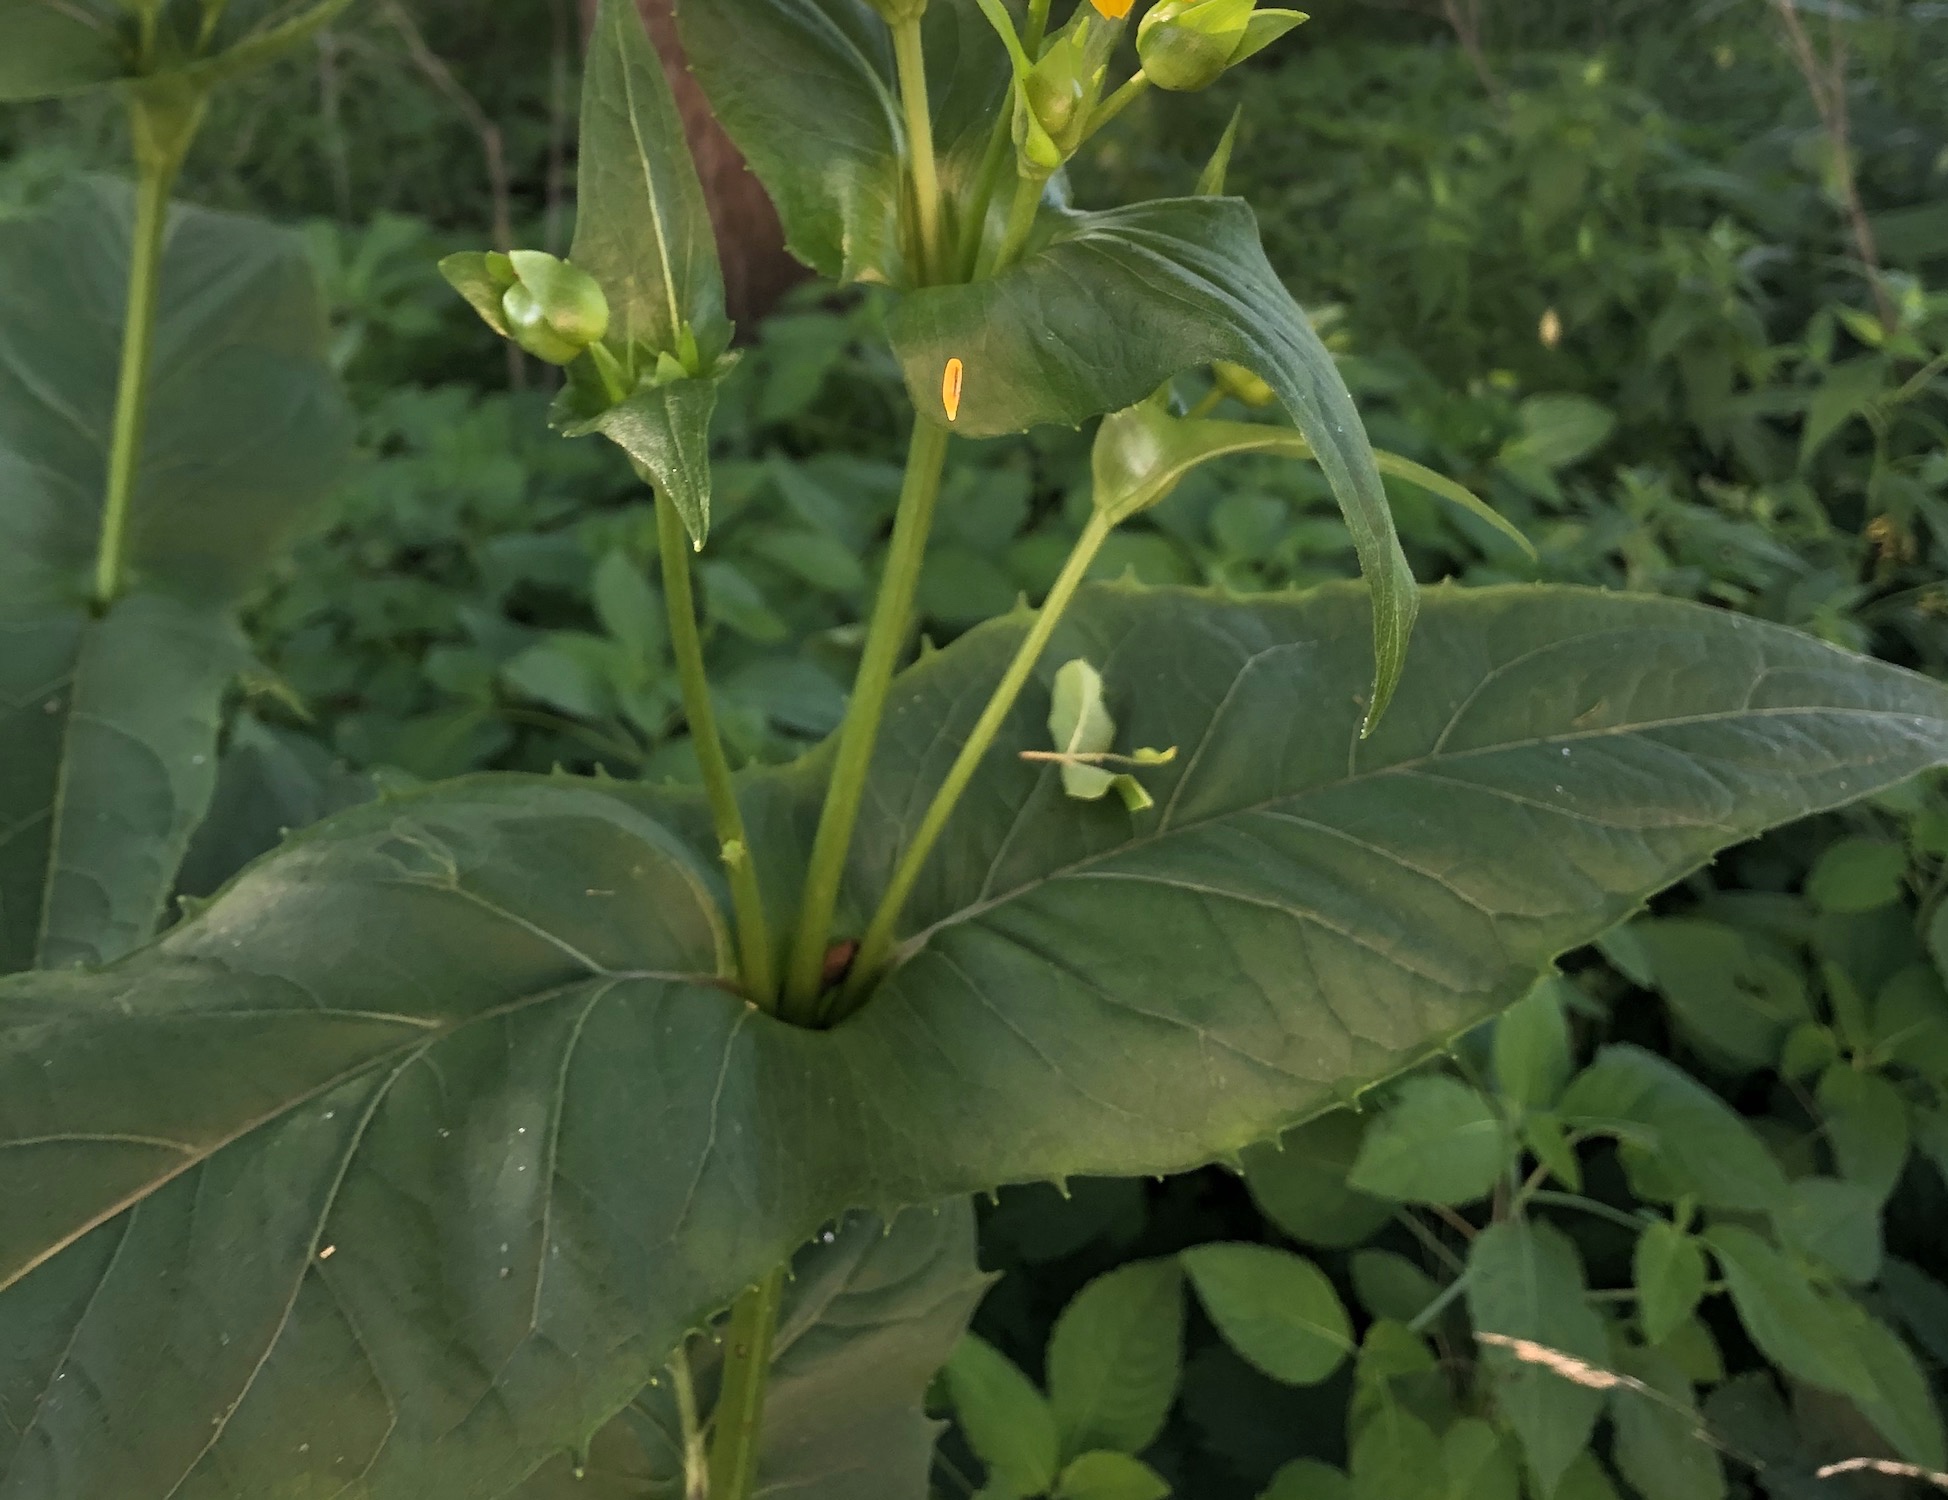 Cup Plant at edge of woods between Marion Dunn and Oak Savanna in Madison, Wisconsin on July 5, 2020.